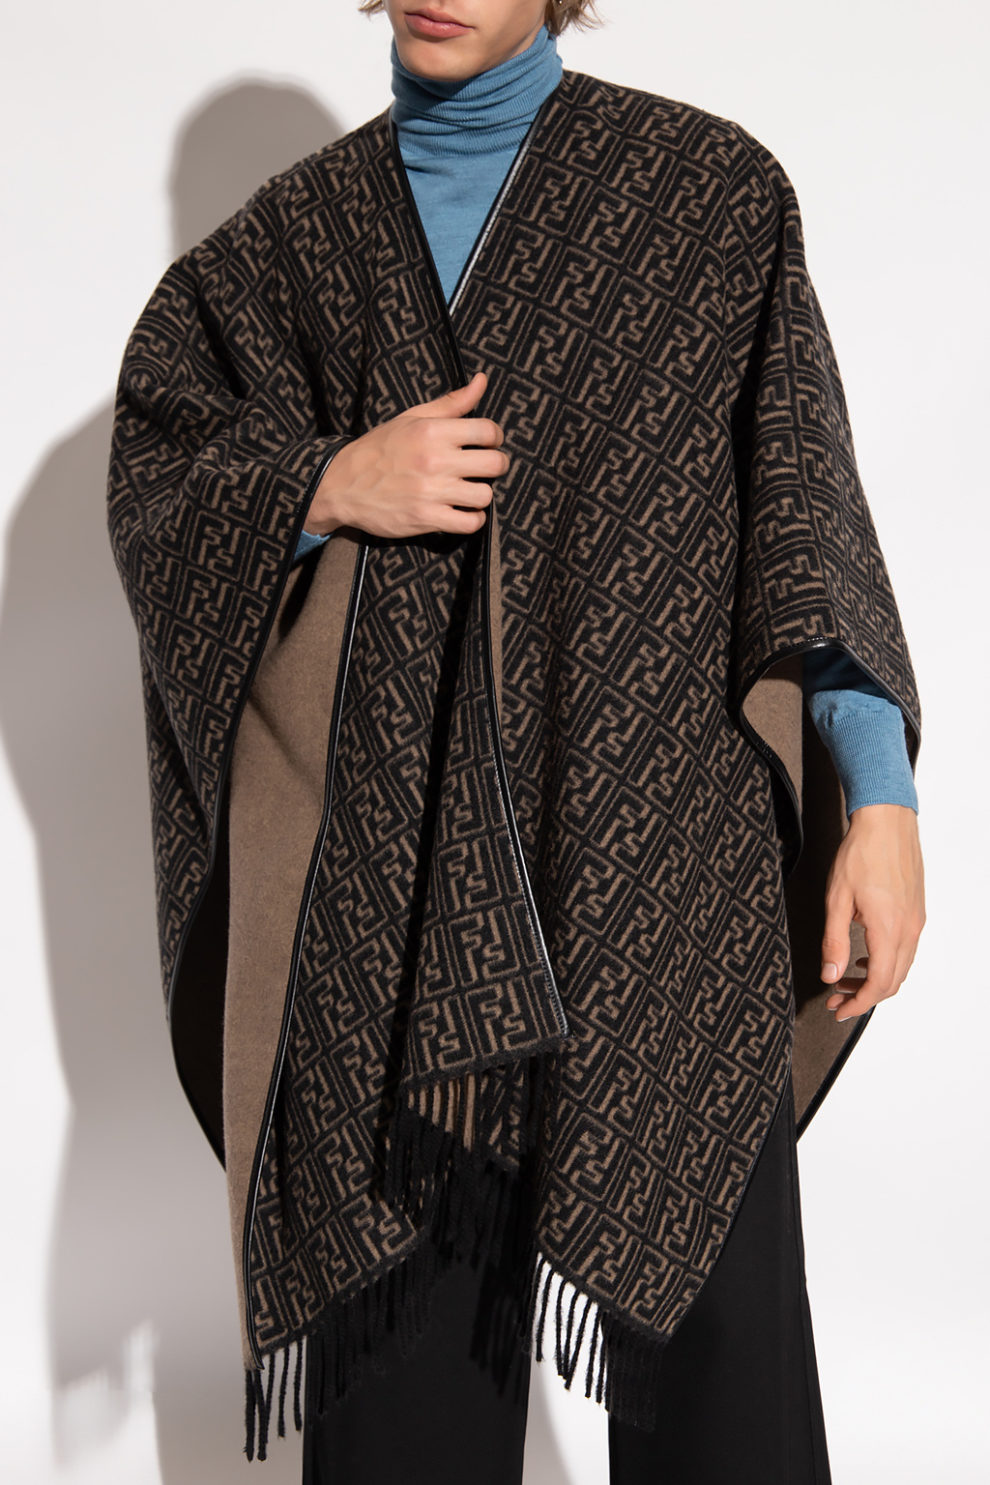 What You Need to Know About Men's Wool Ponchos